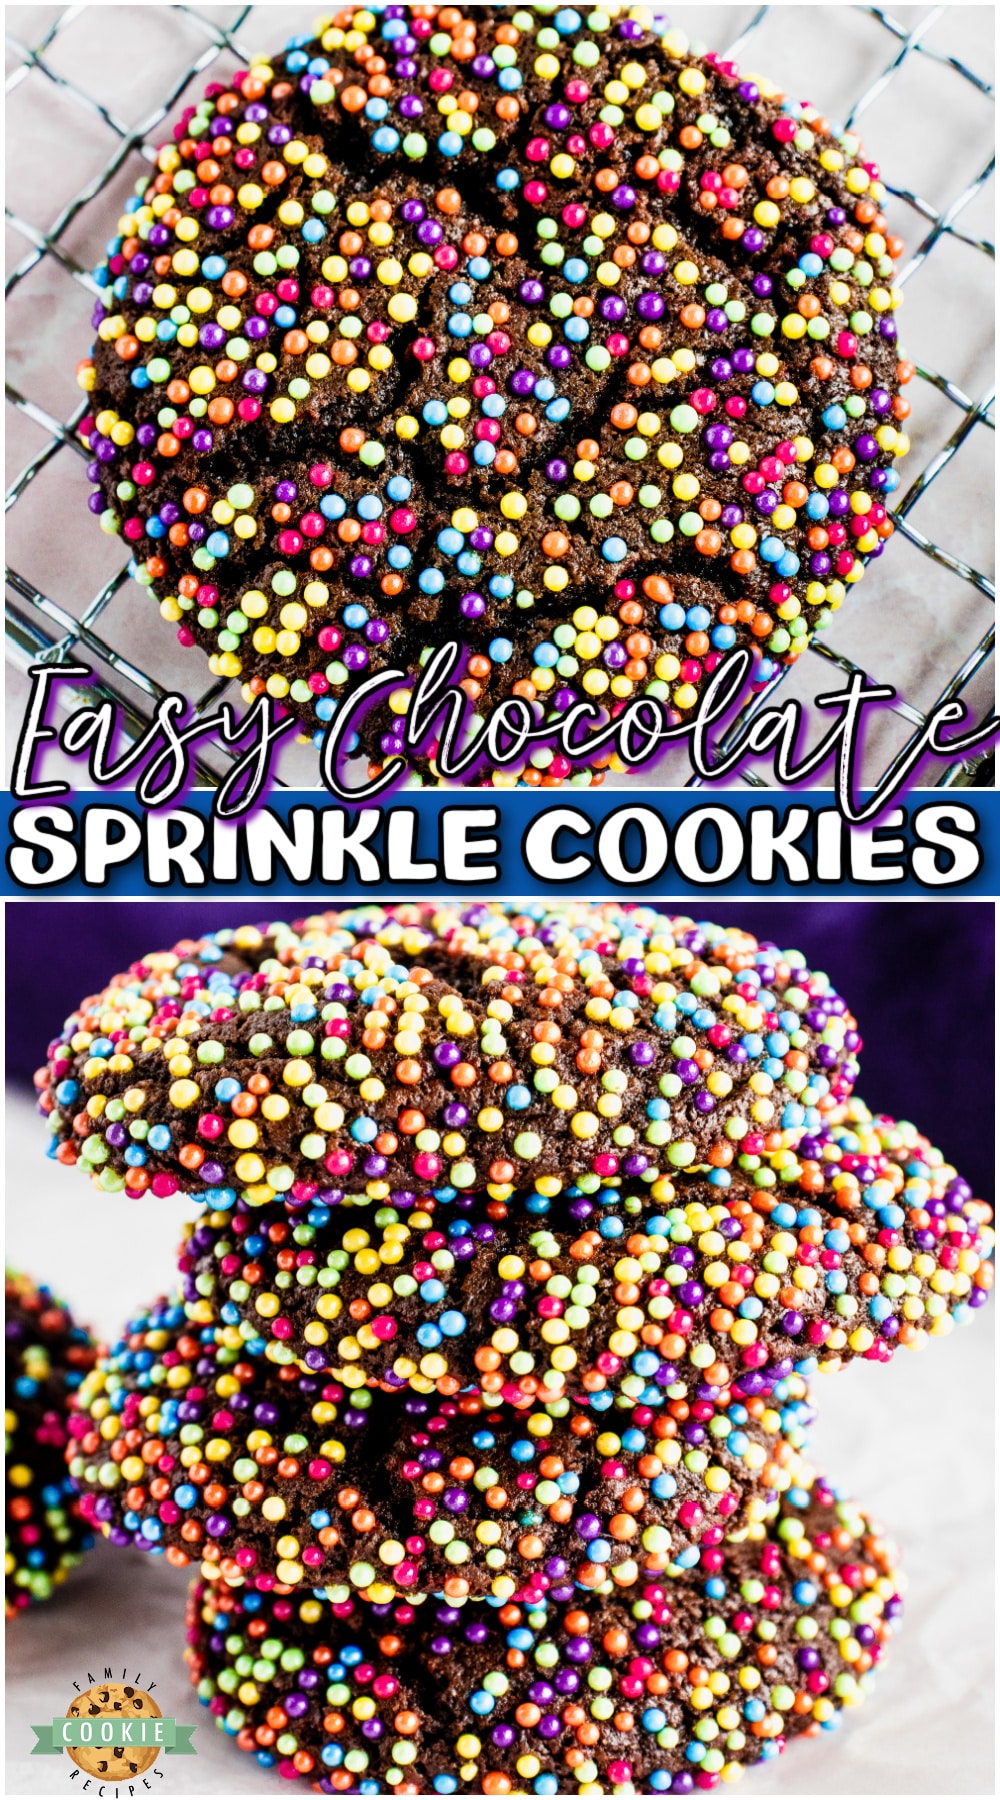 Chocolate Sprinkle Cookies are made from scratch, rolled in colorful sprinkles & so pretty! Cookies with sprinkles made with simple ingredients for a delightful chocolate treat!